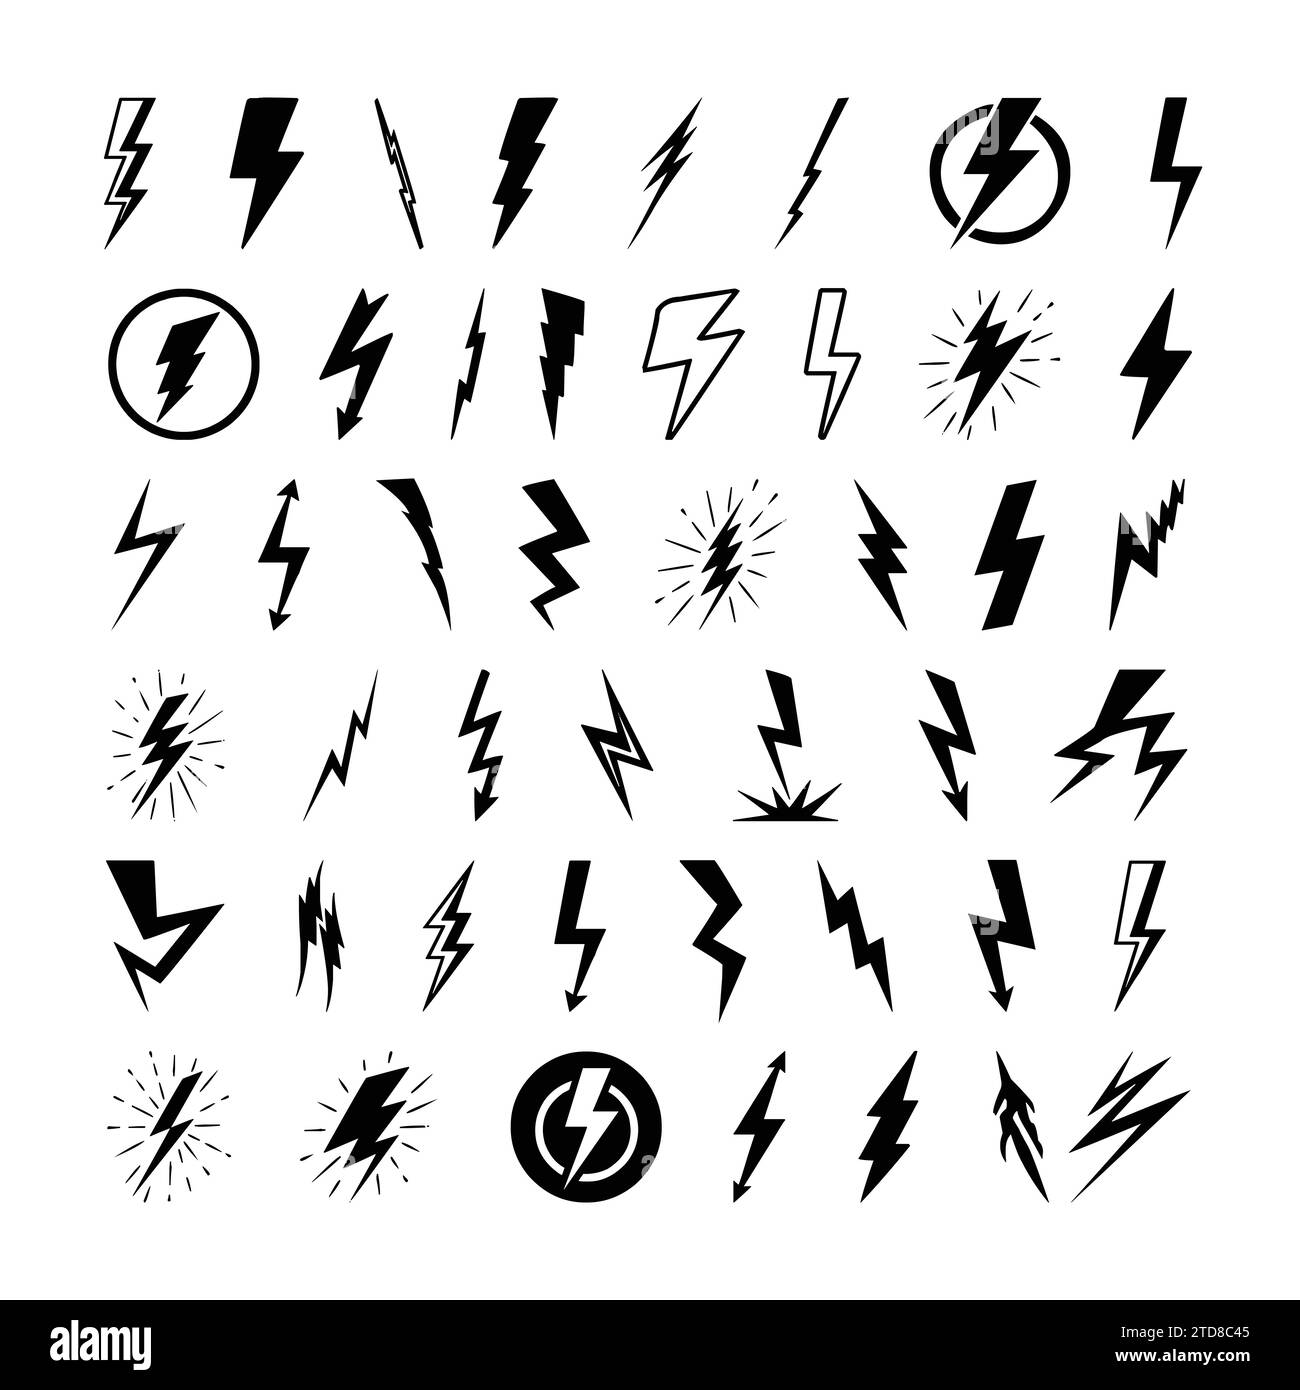 Lightning Bolt Flash Icon Set. Energy Power Charge Sign. Thunder strike Electricity Symbol. Powerful Electrical Discharge Hitting From Side To Side. Stock Vector